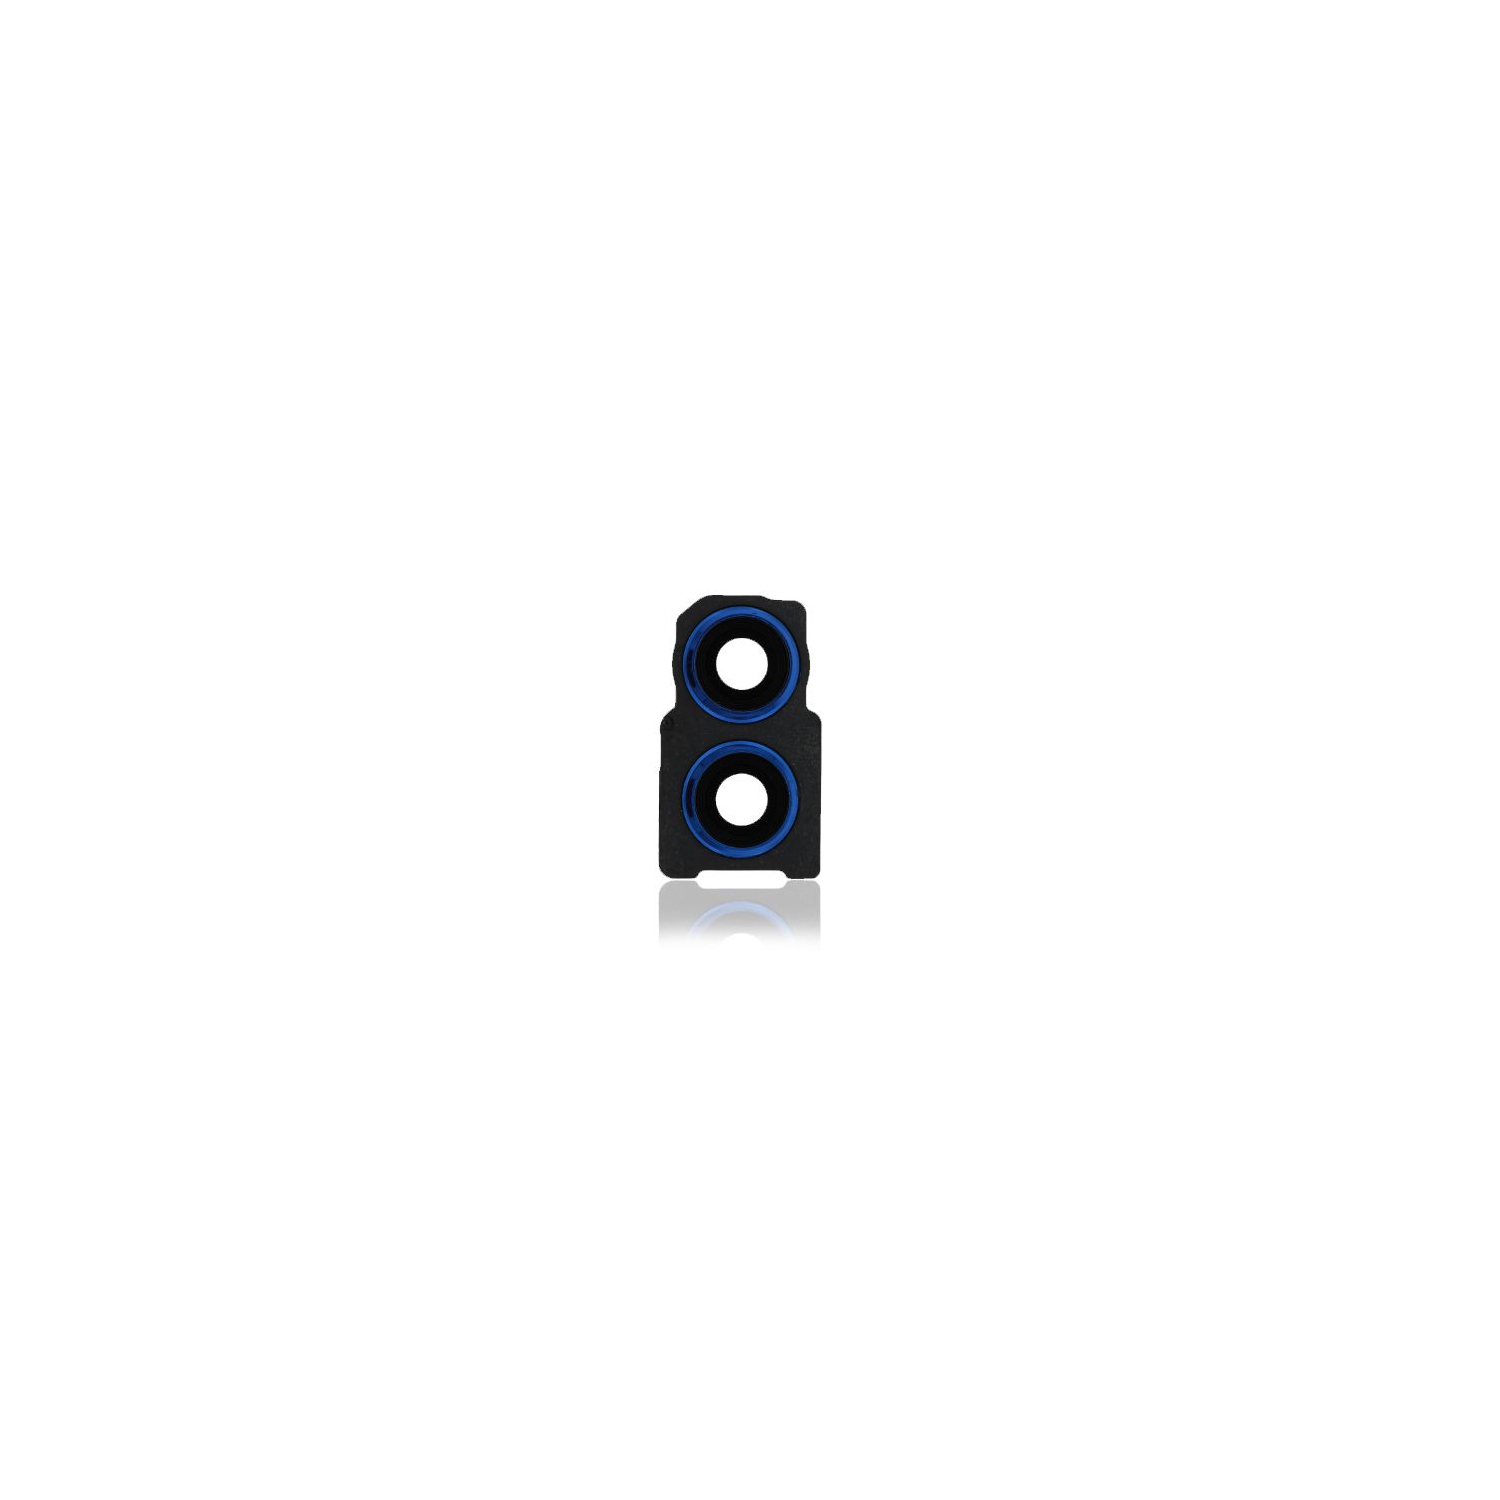 Replacement Back Camera Lens With Bracket Compatible For Huawei P Smart 2019 / P Smart Plus 2019 (Aurora Blue)